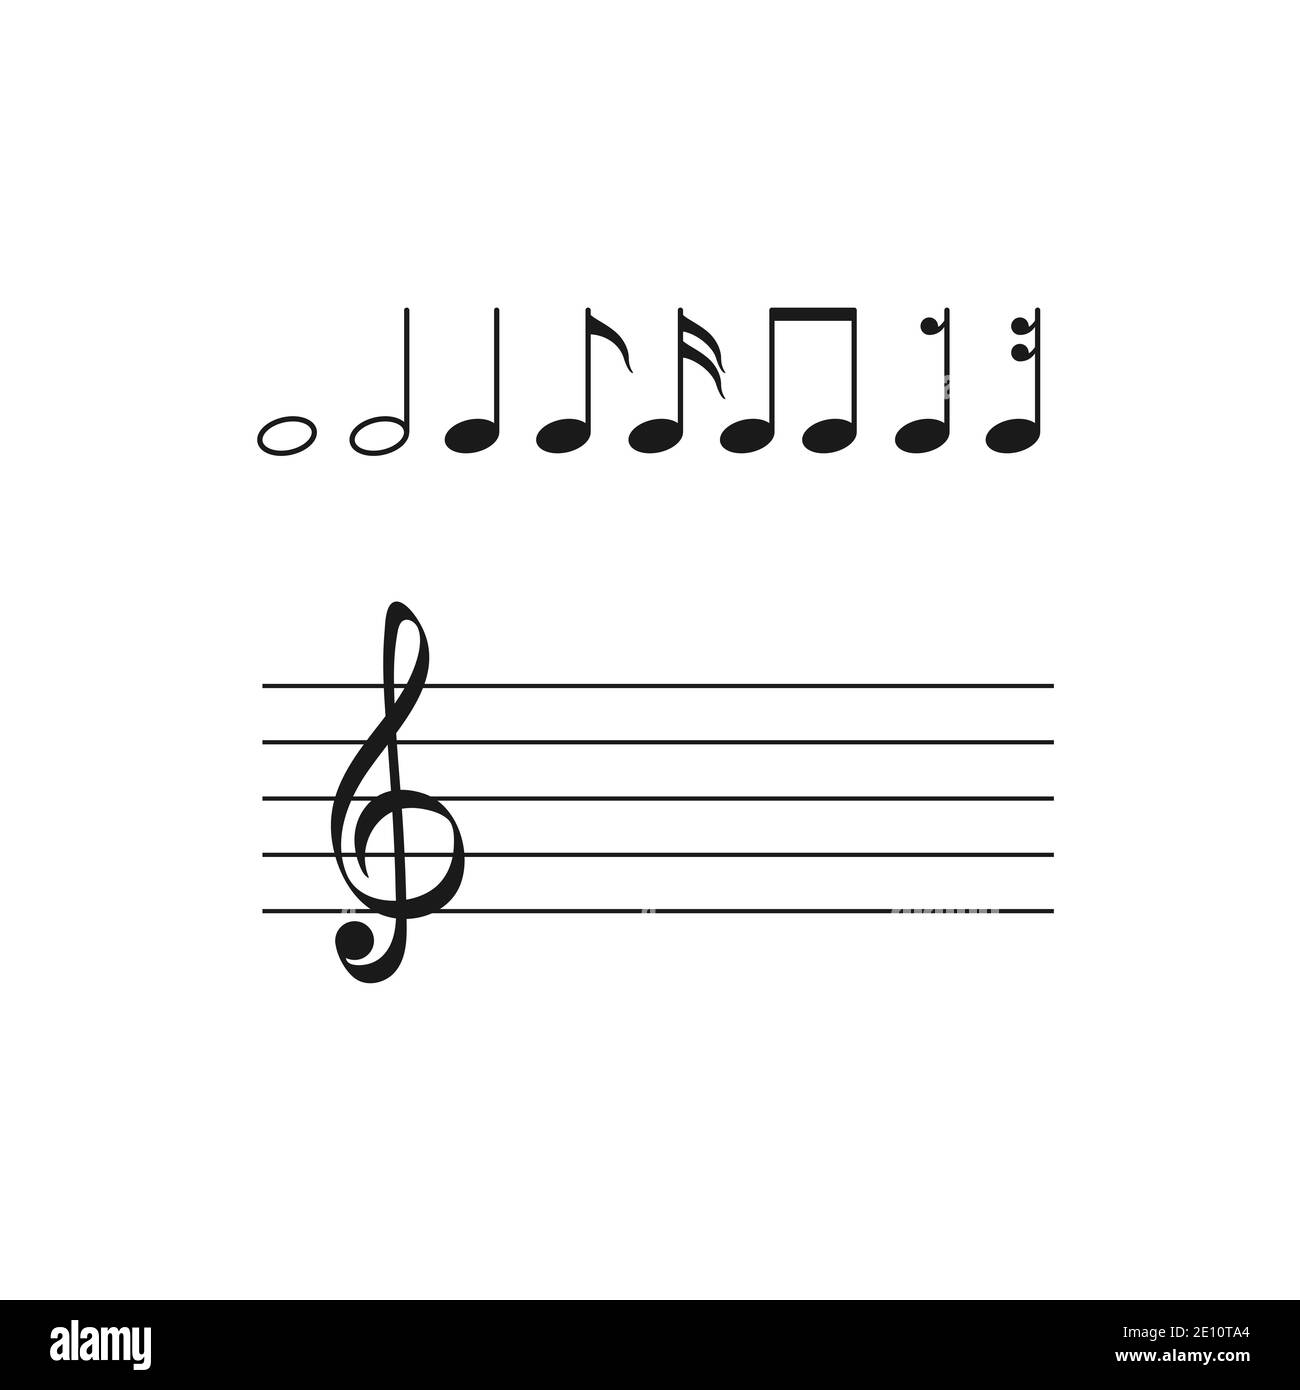 Note Paper For Musical Notes Stock Illustration - Download Image